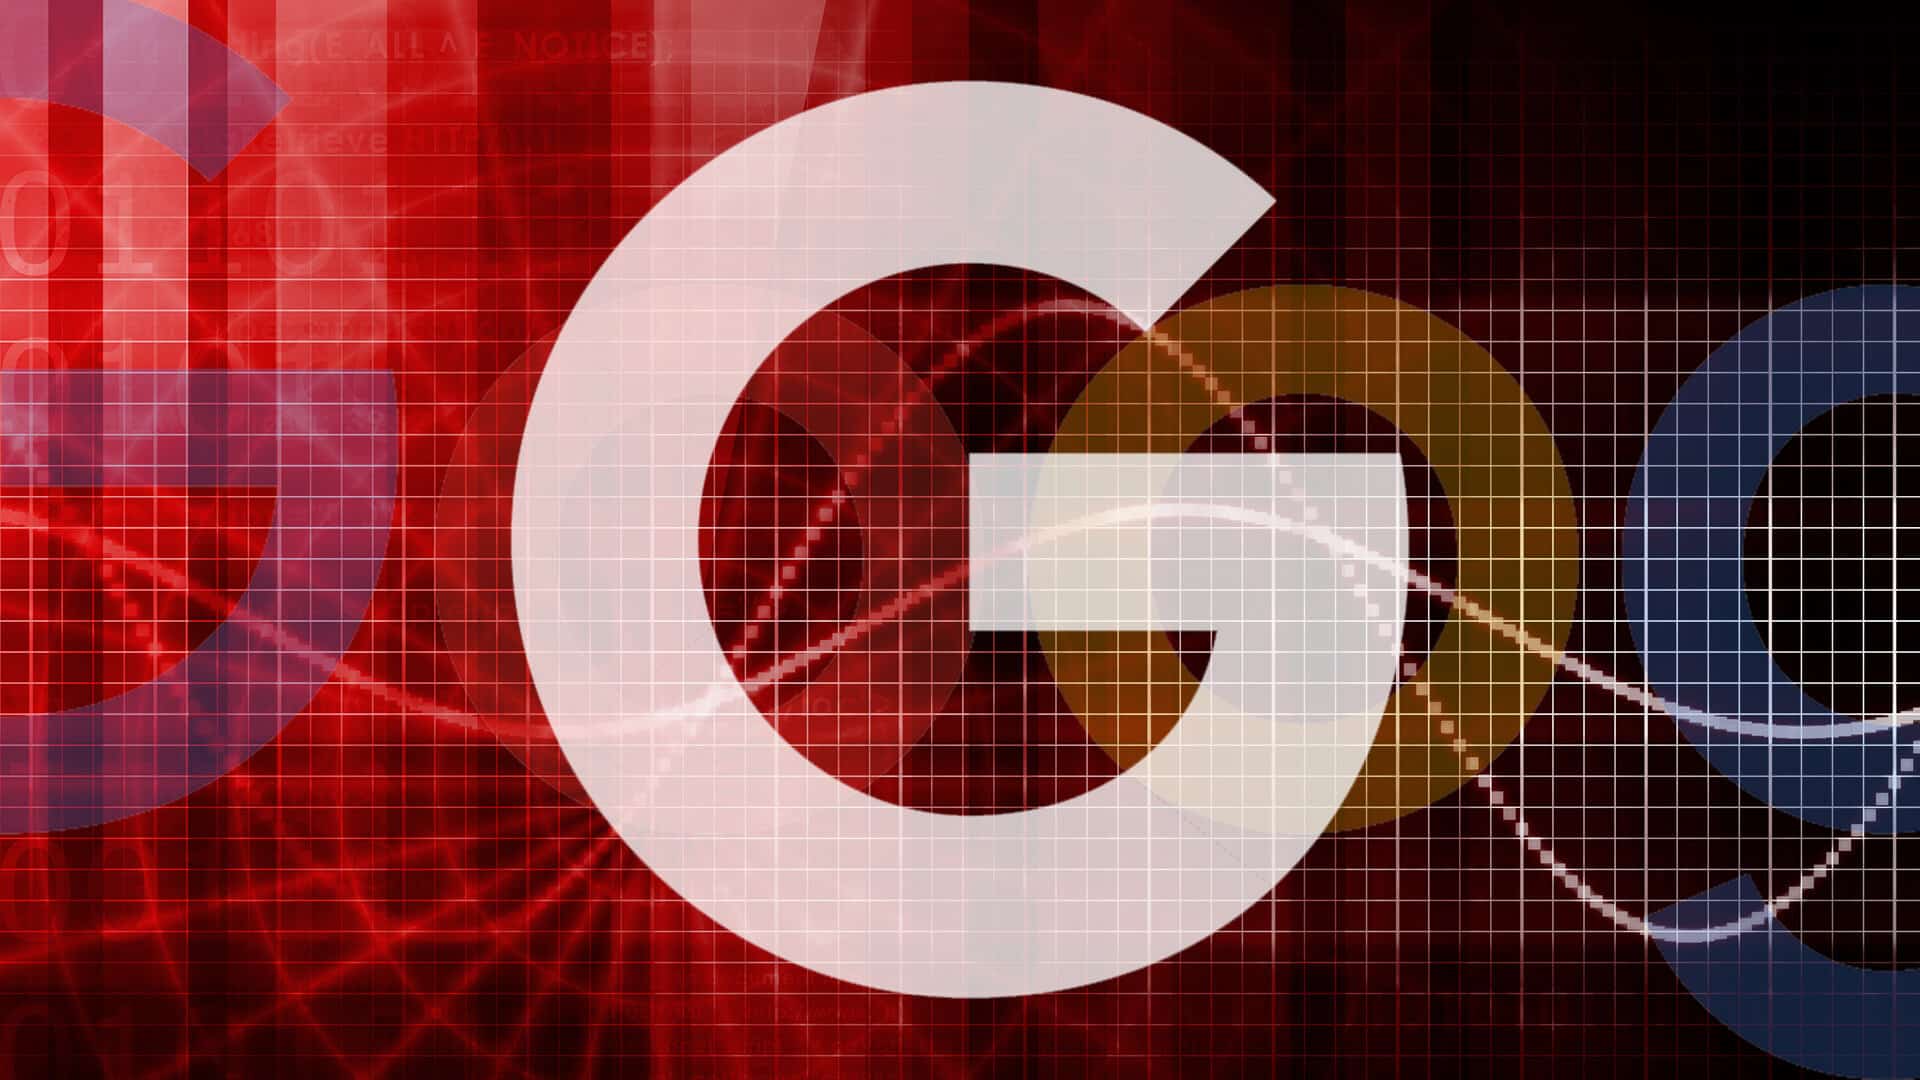 Blog: Recent Changes to Organic Sitelinks Cause Major Drops in Impressions in Google Search Console | TechnicalSEO.com